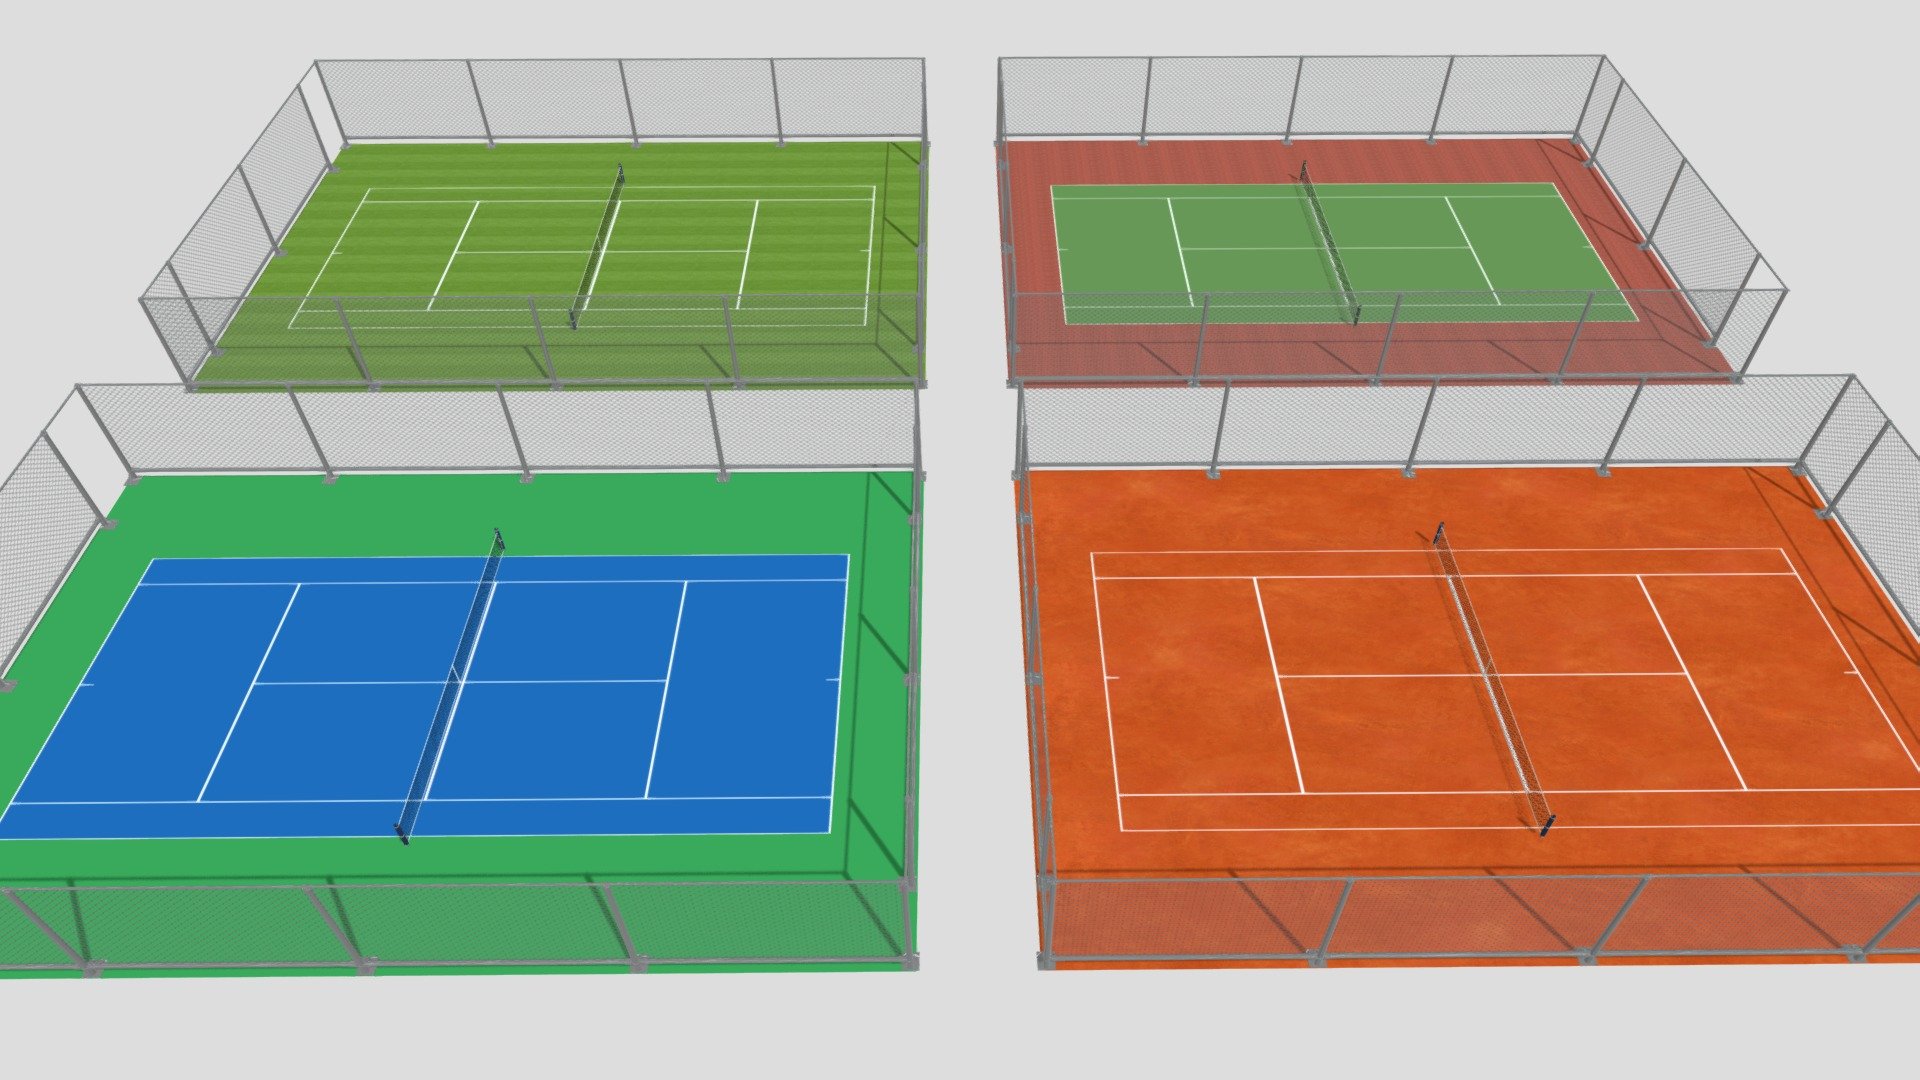 Tennis Court 3D model is a high quality, photo real model that will enhance detail and realism to any of your game projects or commercials. The model has a fully textured, detailed design that allows for photorealistic renders. The model is completely textured 3d model